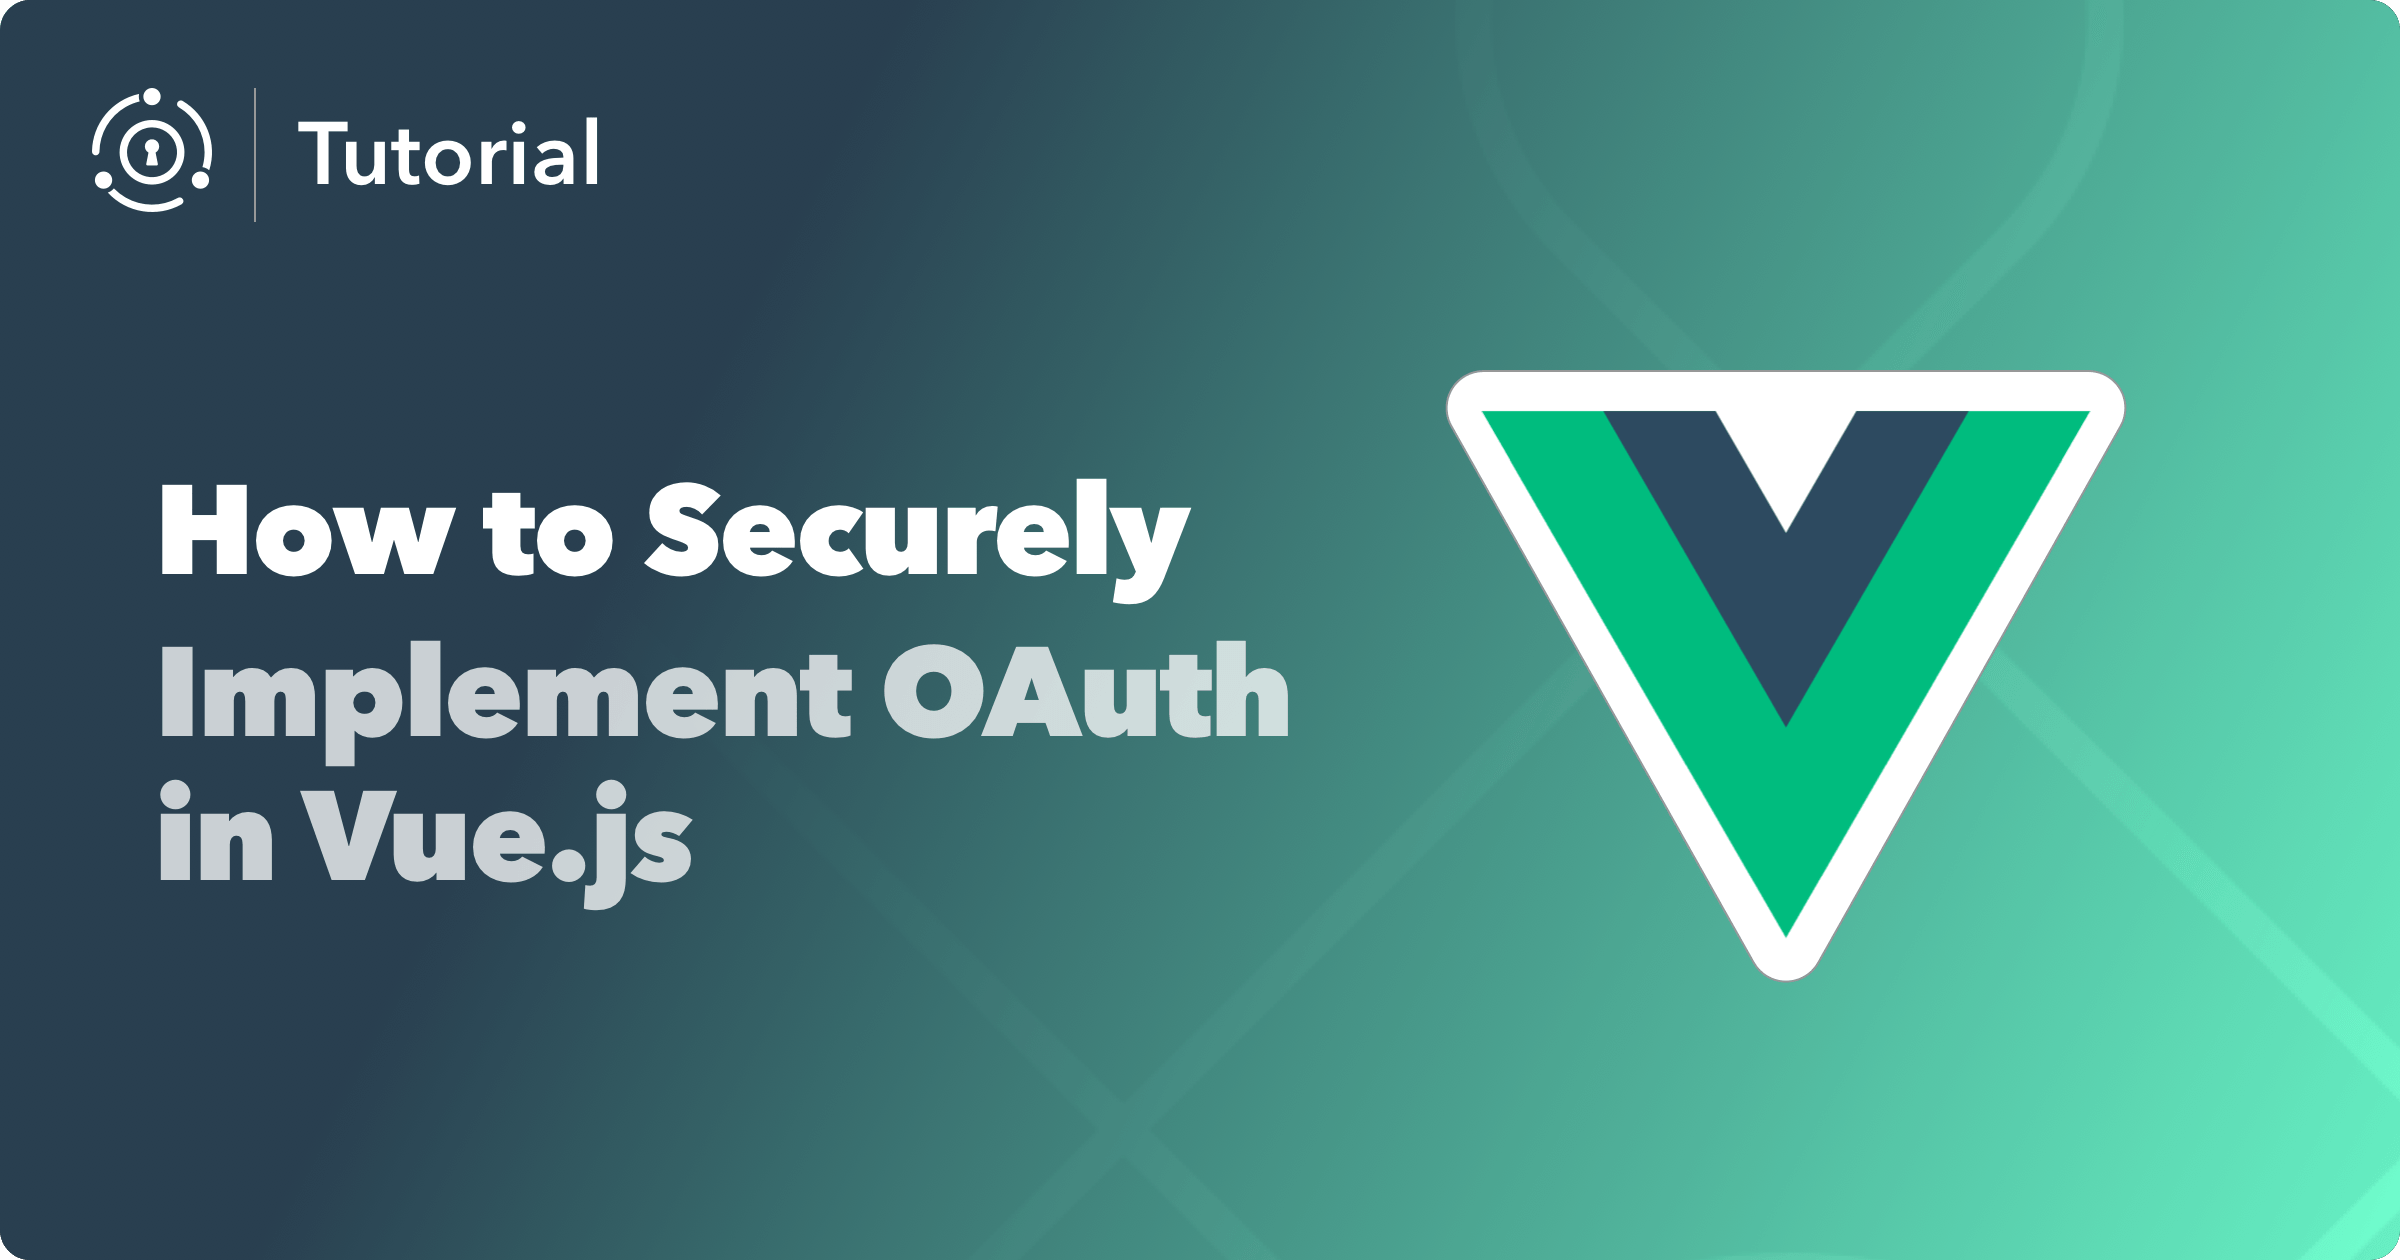 How to Securely Implement OAuth in Vue.js